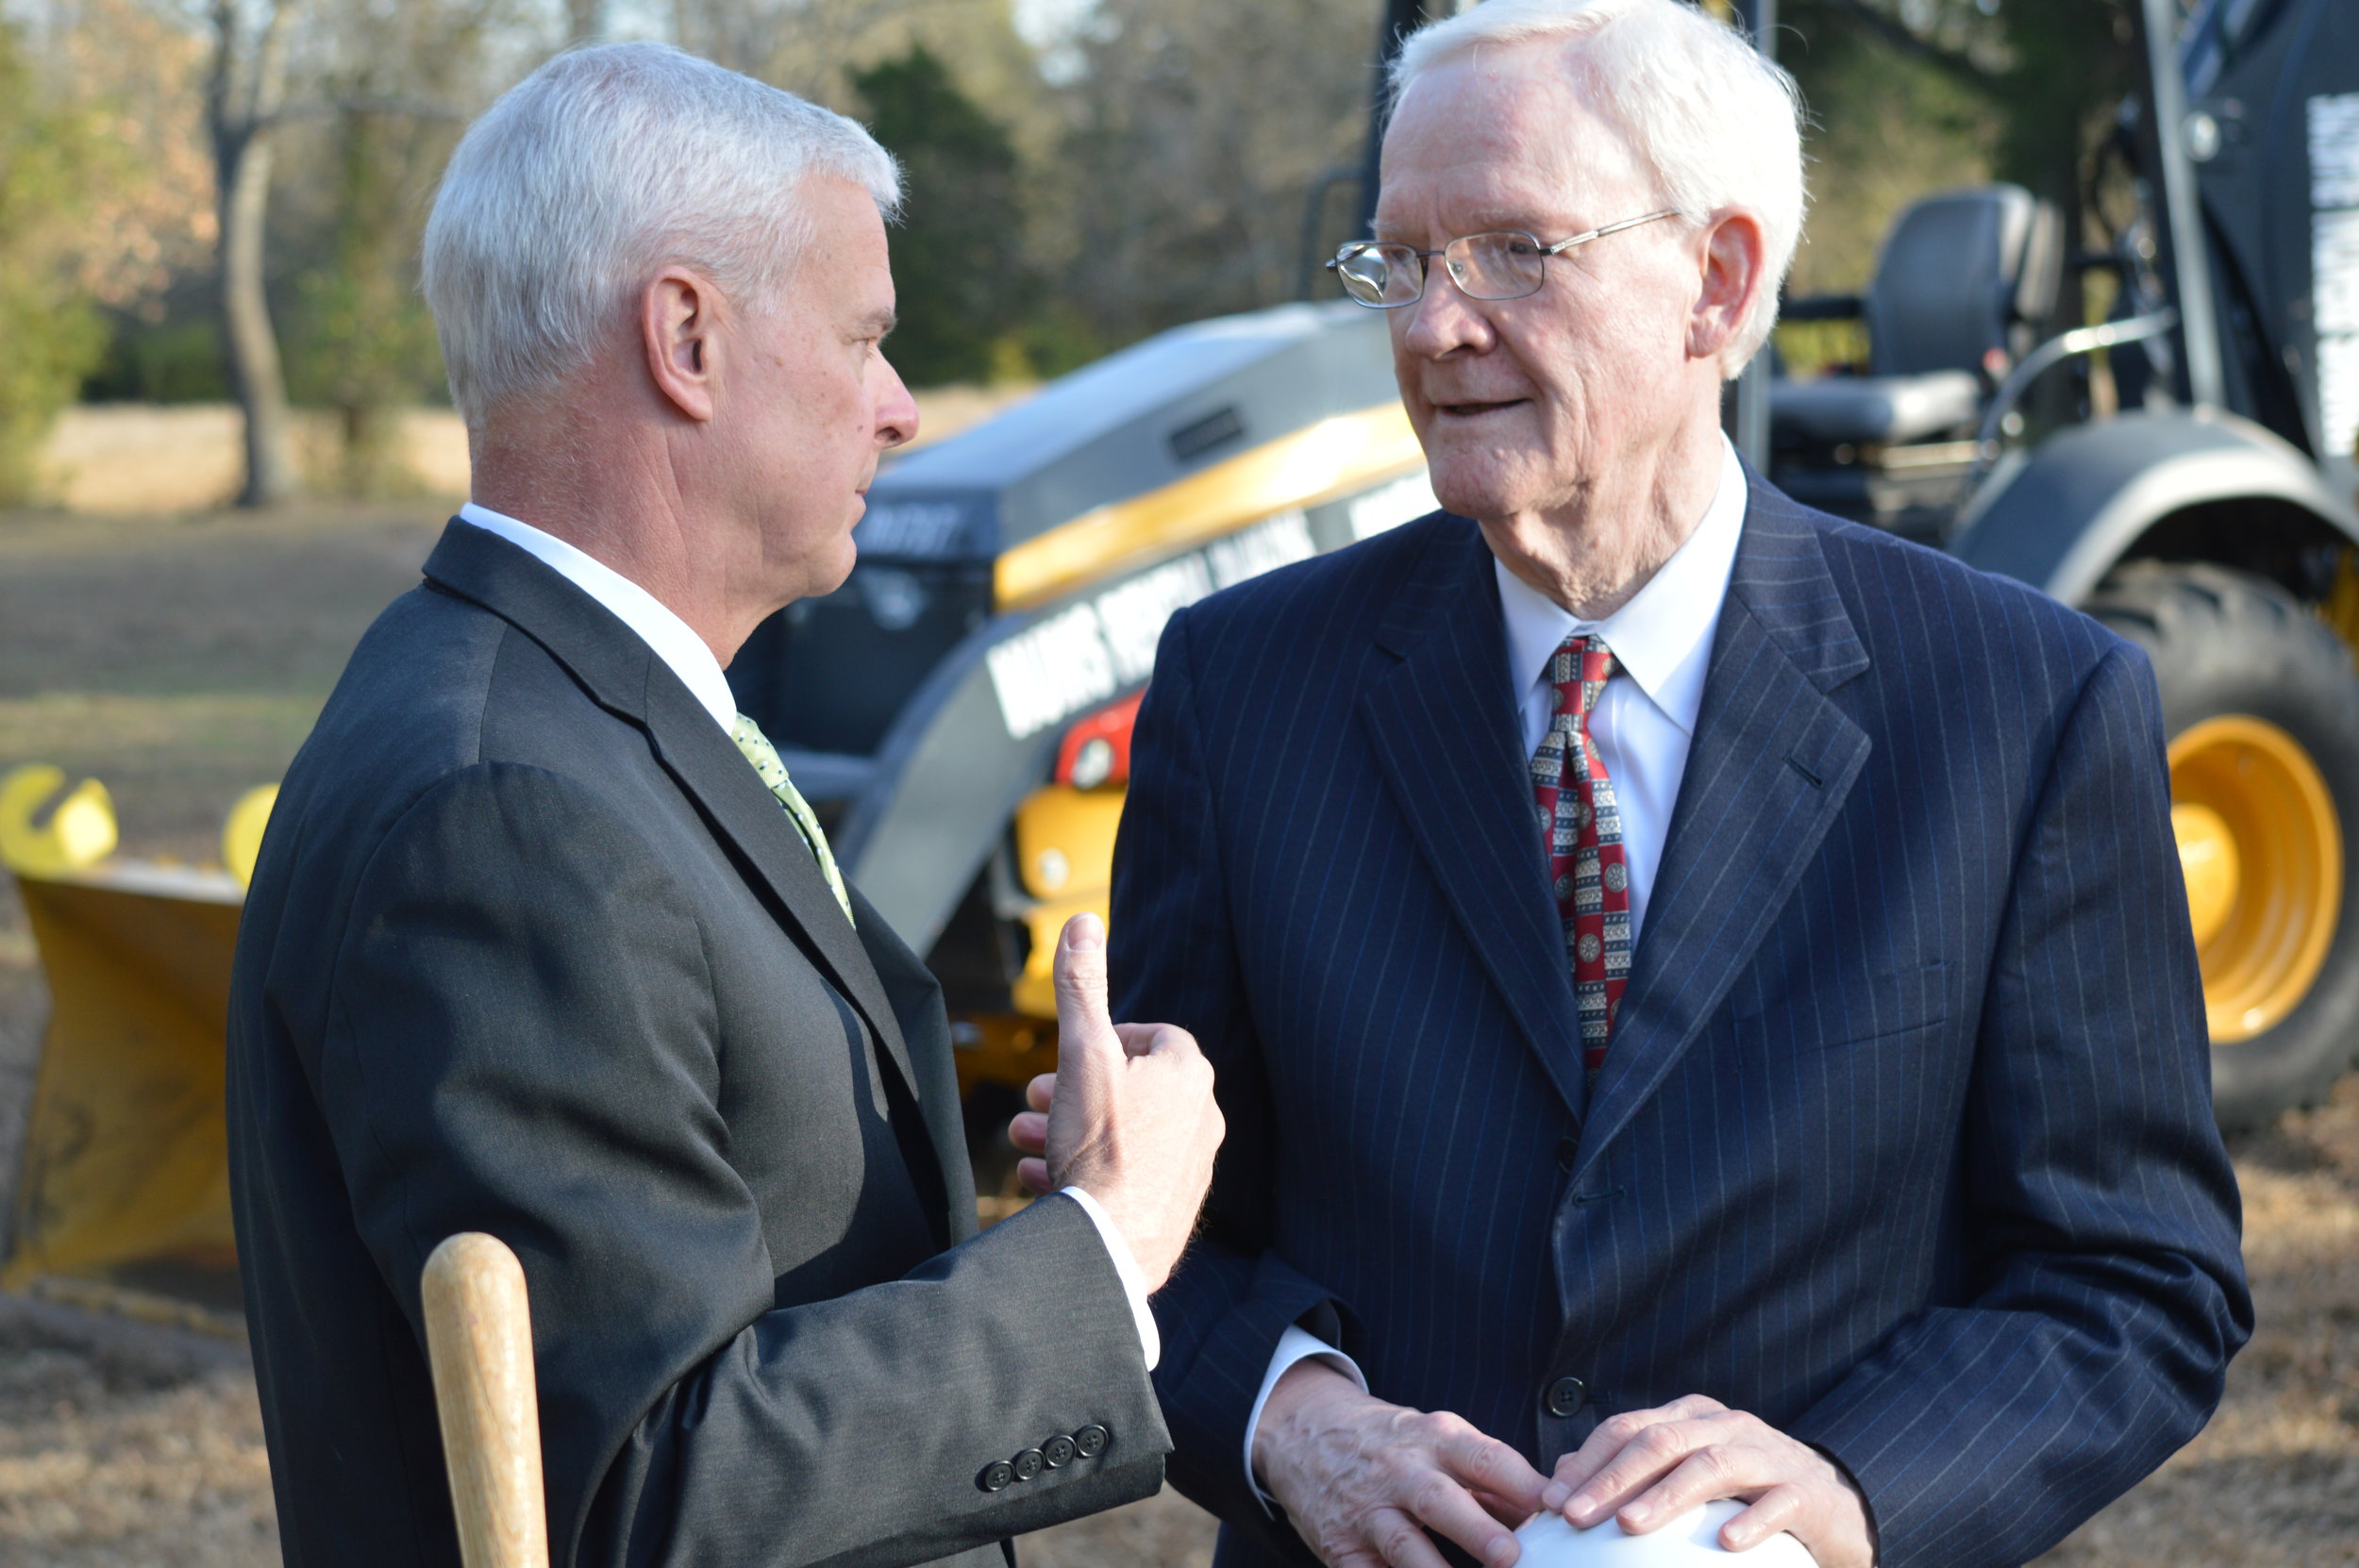 U.S. Rep. Steve Womack talks with OurPharma CEO Peter Kohler after a groundbreaking ceremony on Monday. Kohler's new company announced it will manufacture generic drugs in Northwest Arkansas, and construction on the company's new facility will start this winter.